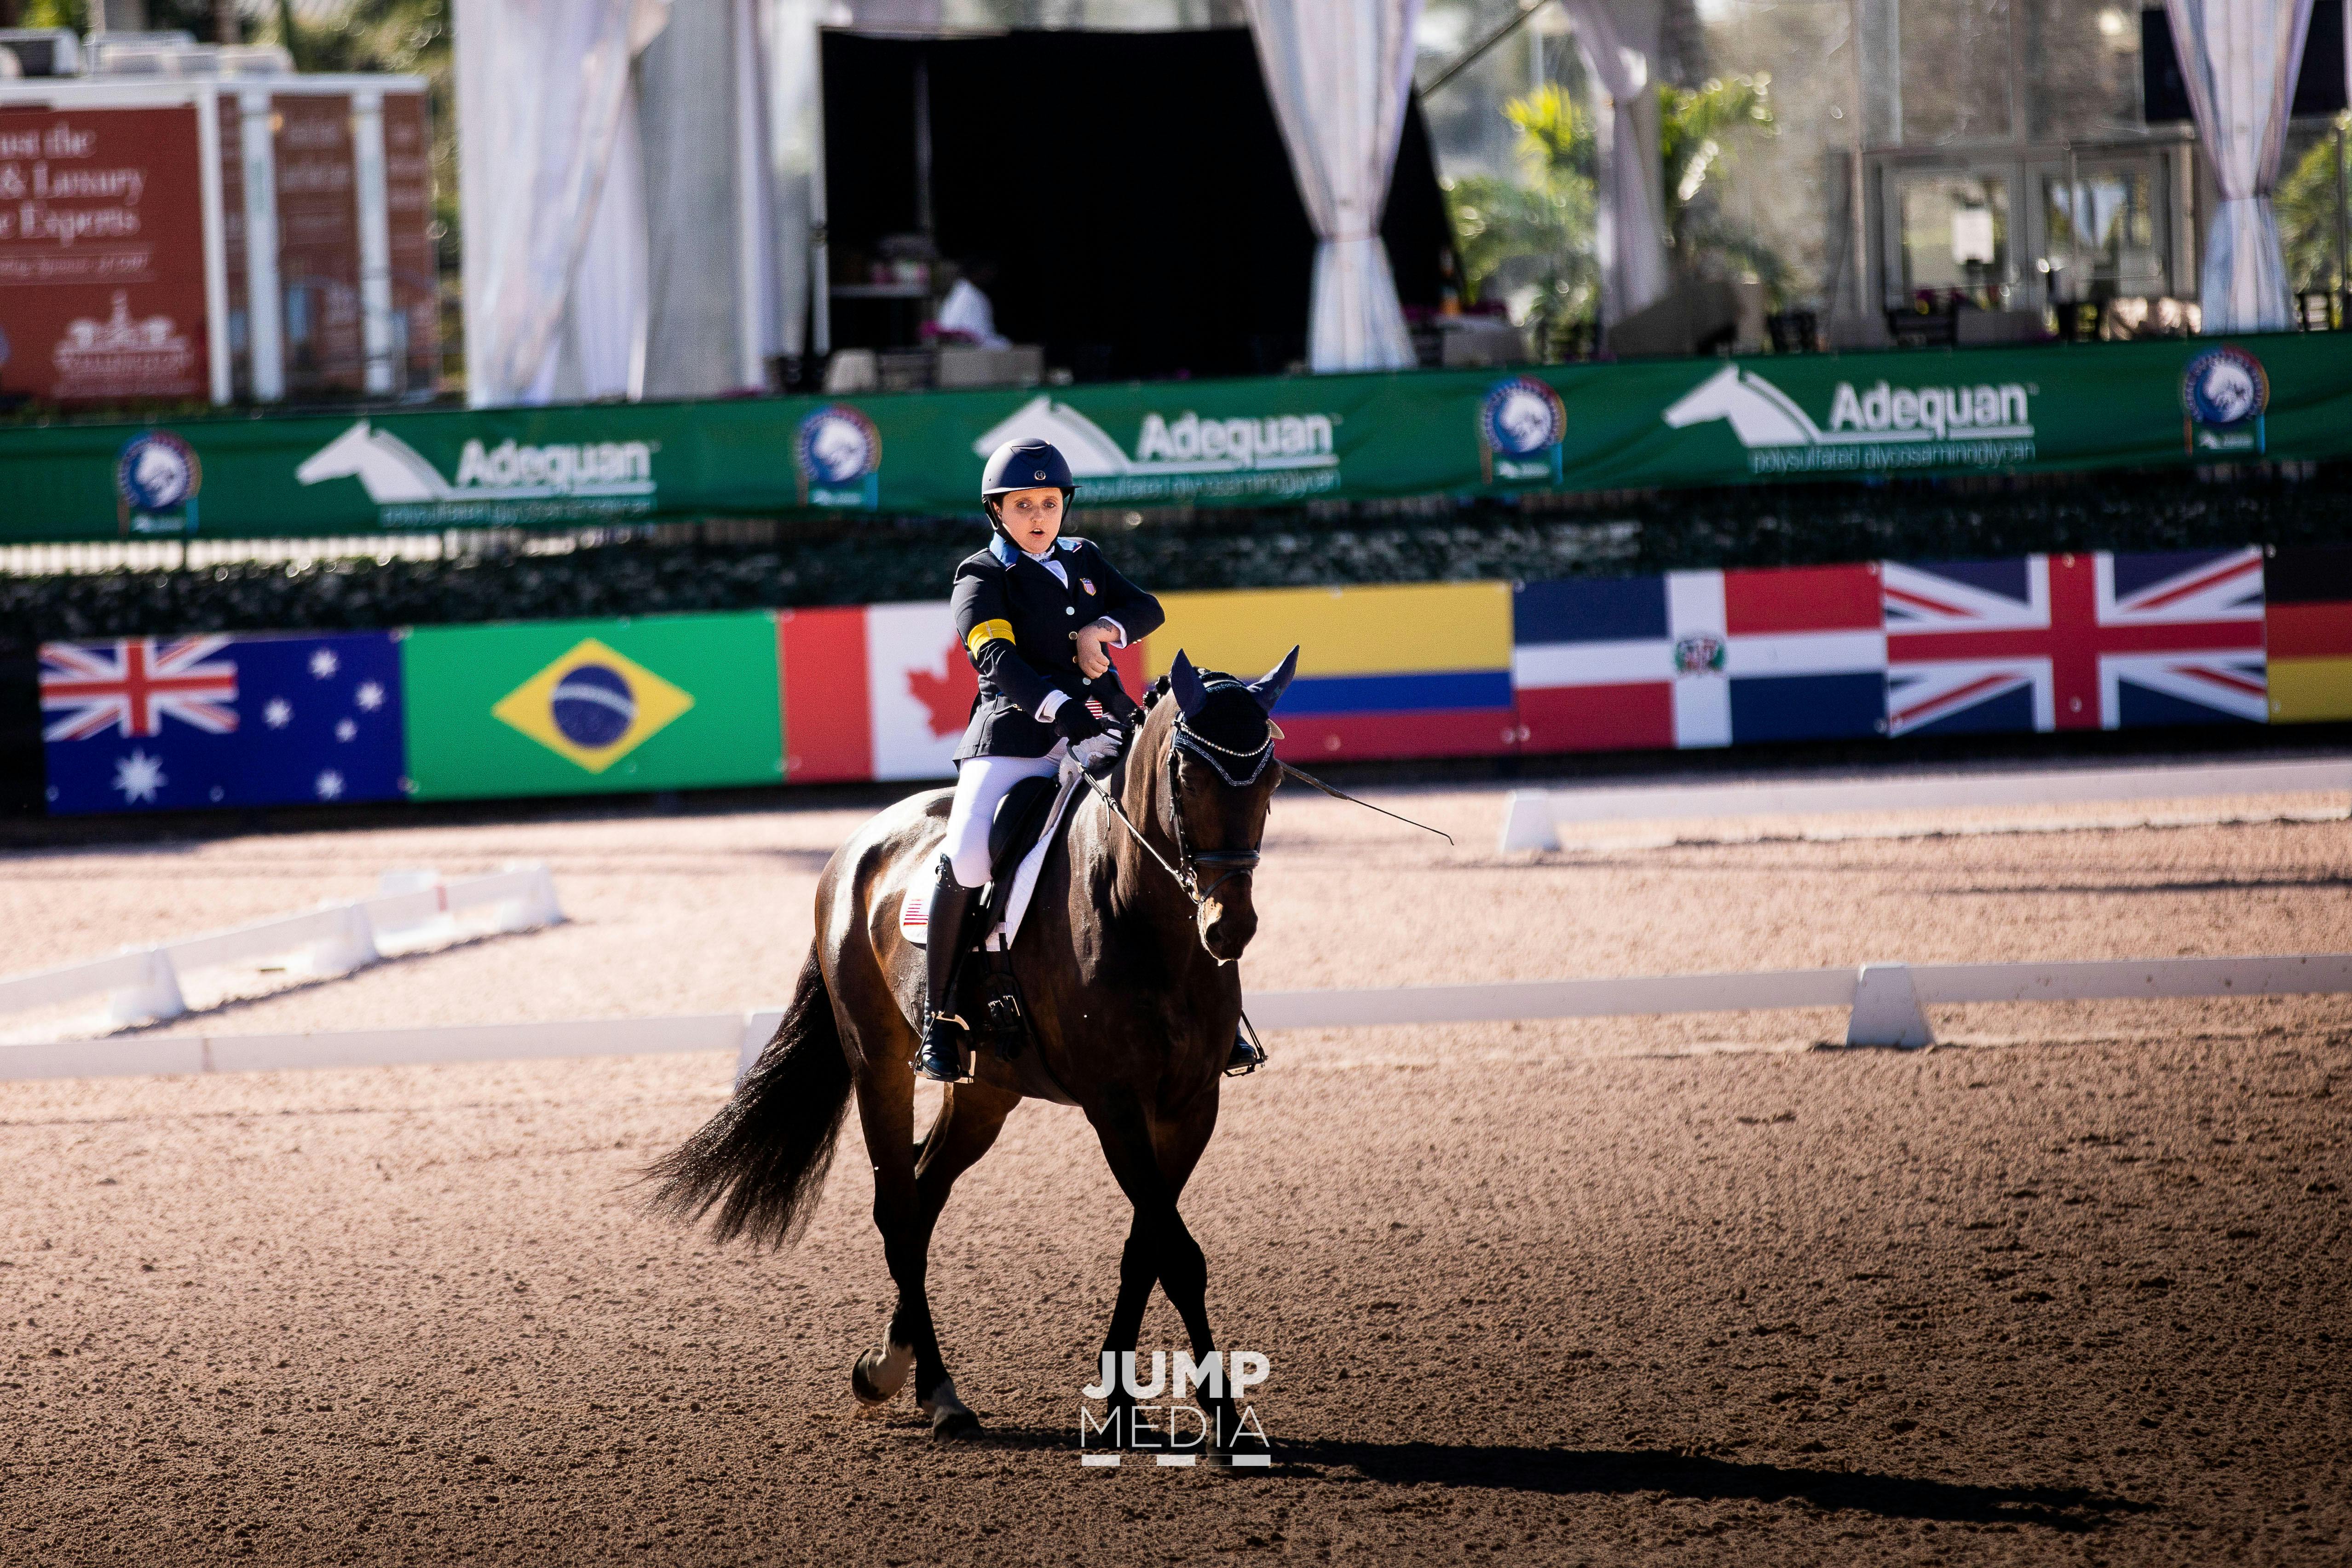 Sydney Collier riding her horse at a para equestrian competition